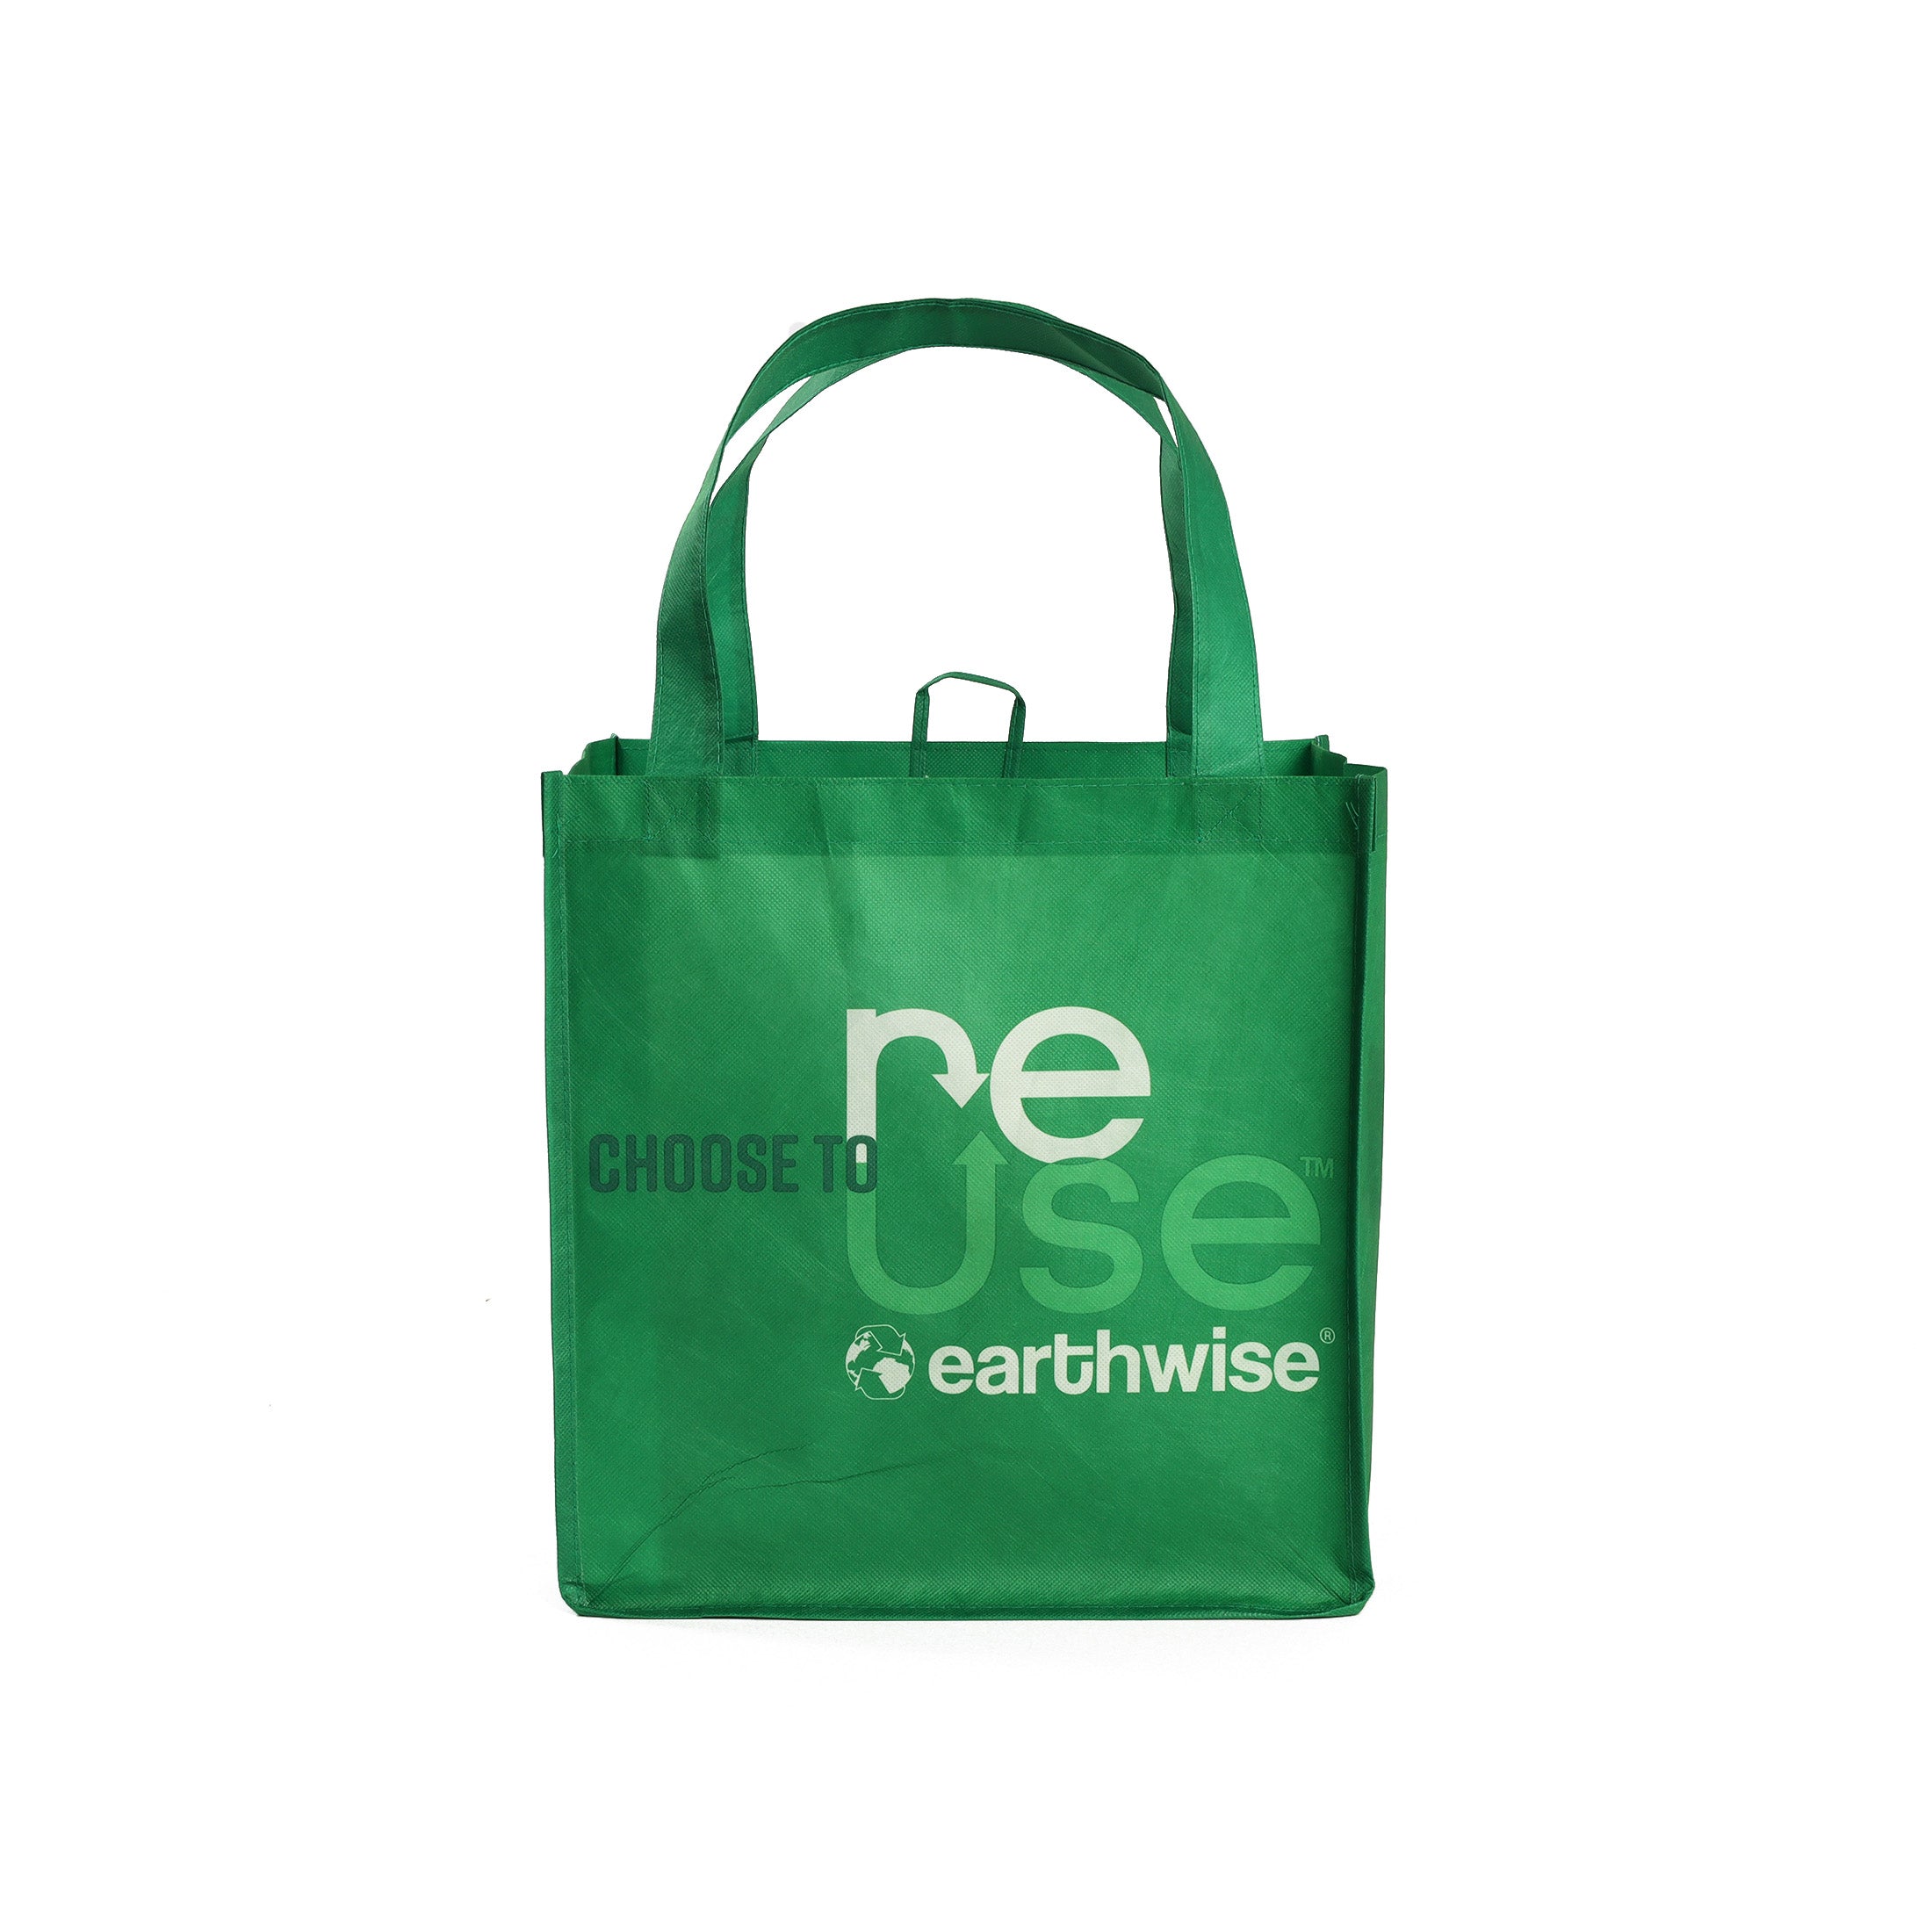 The innovator in reusable bags since 2005 – Earthwise Reusable Bags